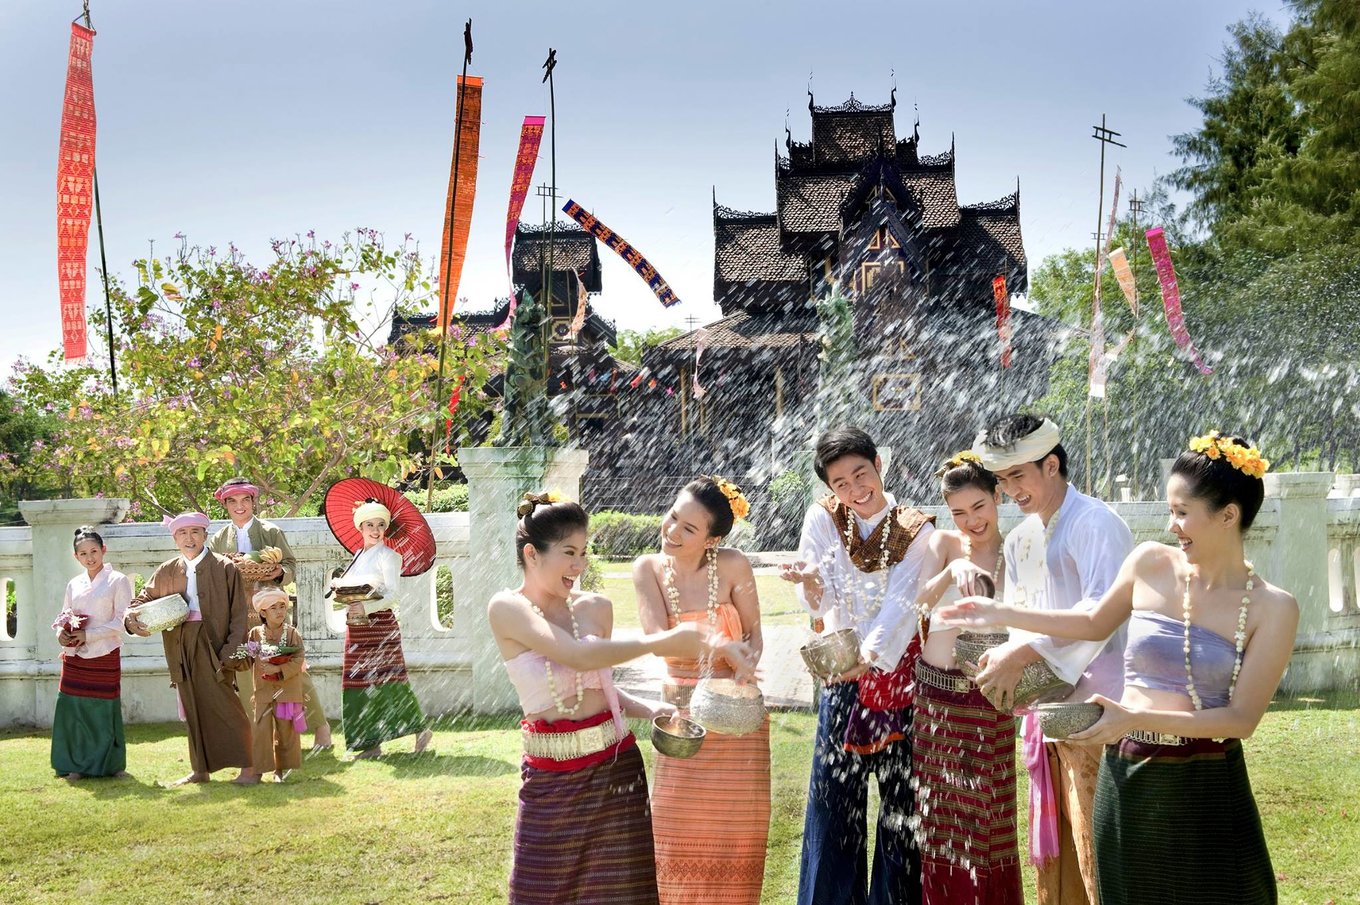 Thai people playing with water during festival